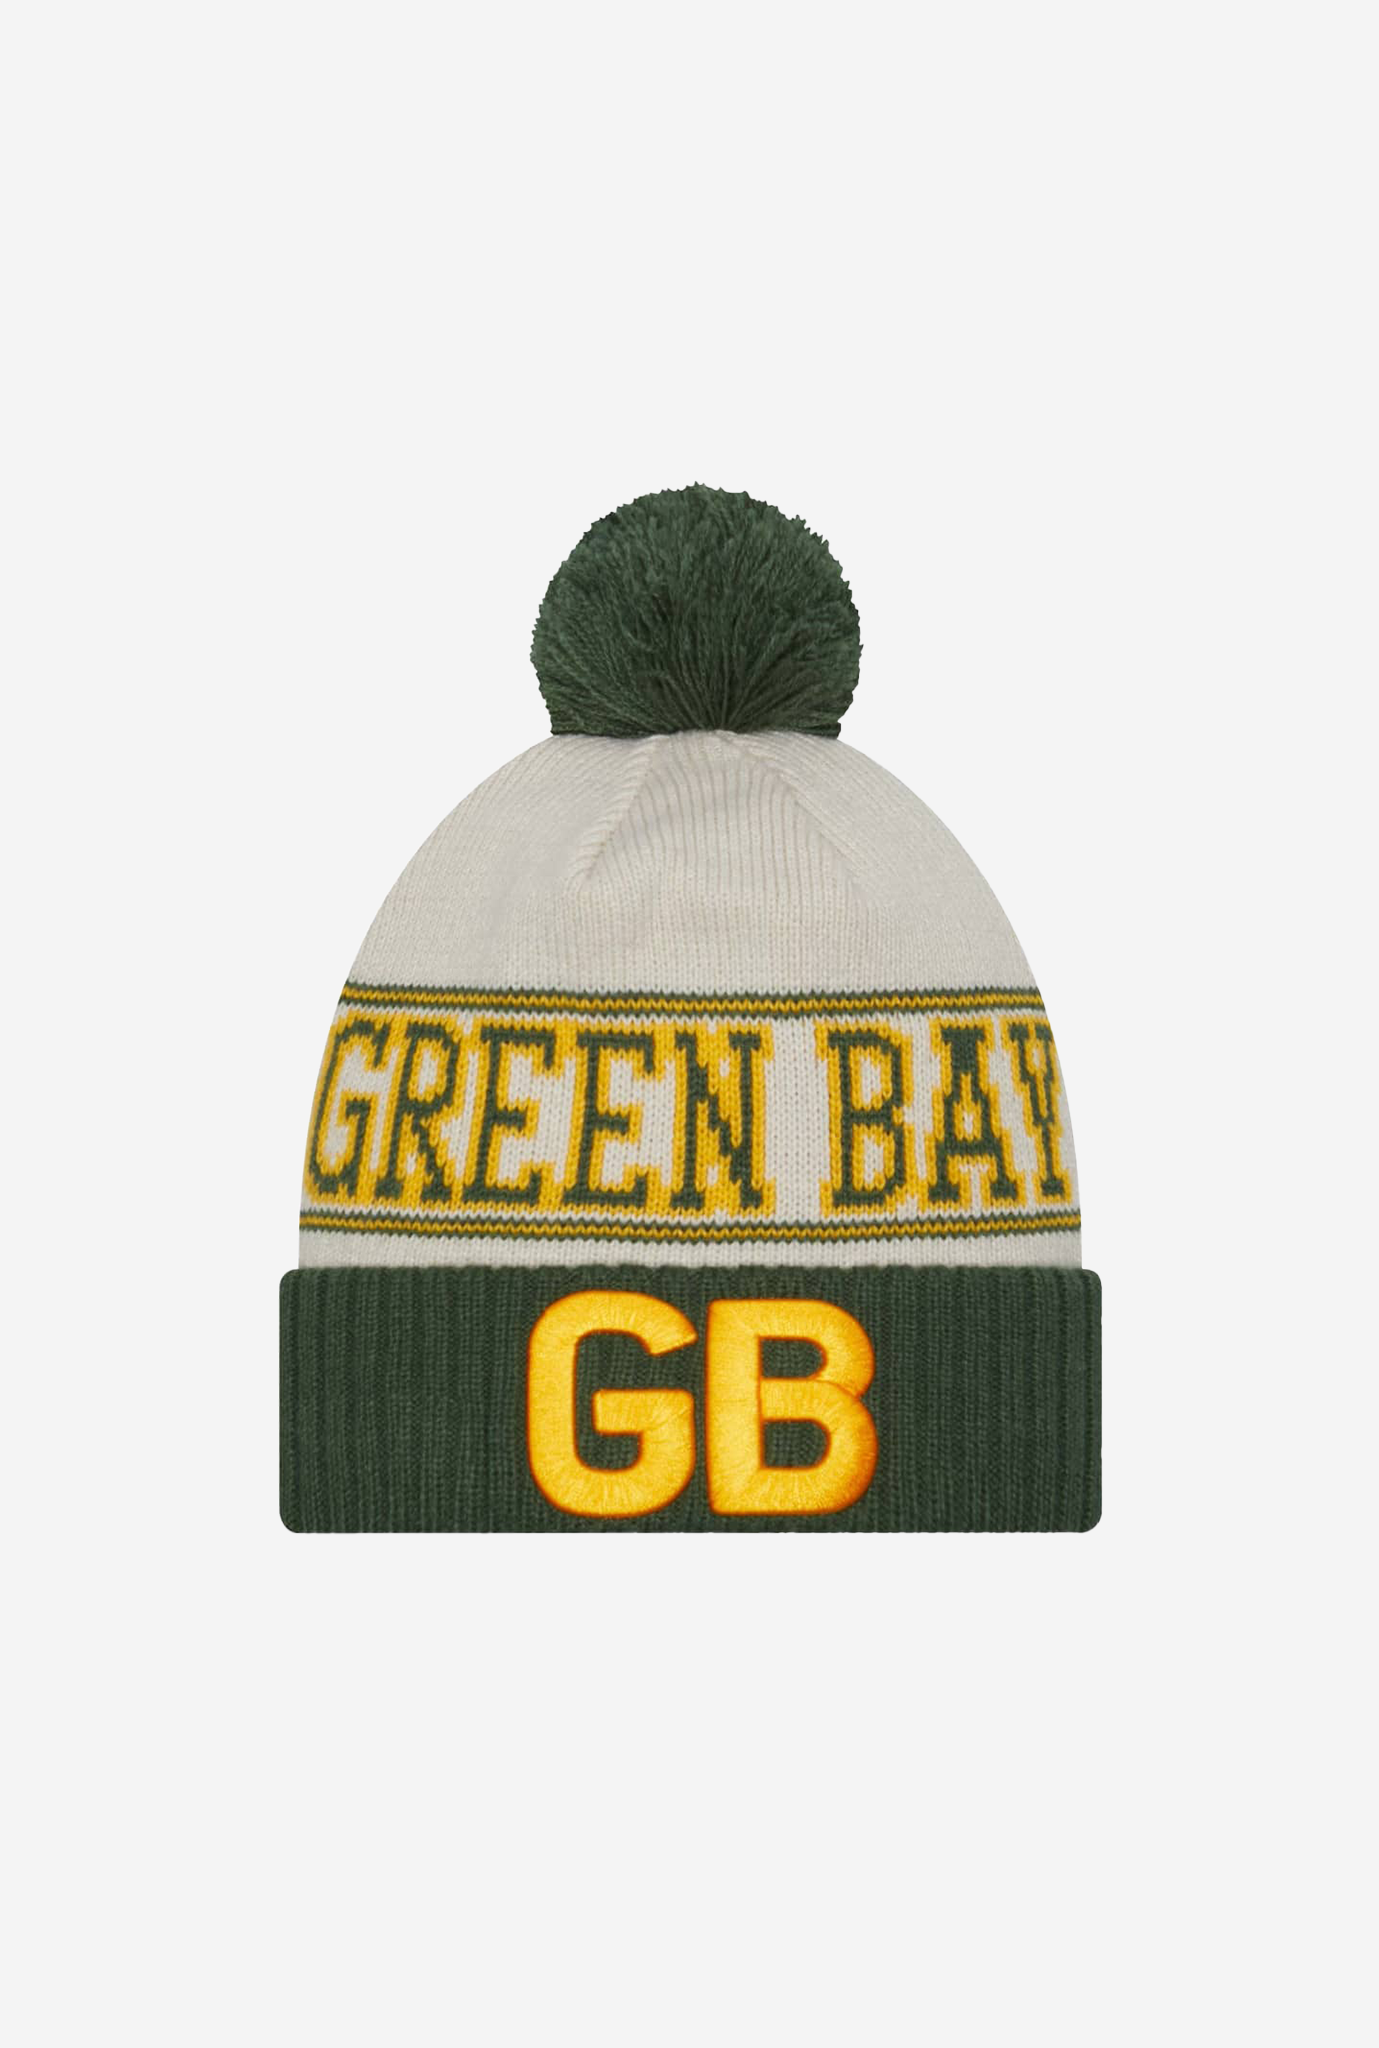 Green Bay Packers NFL 23 Sideline History Knit